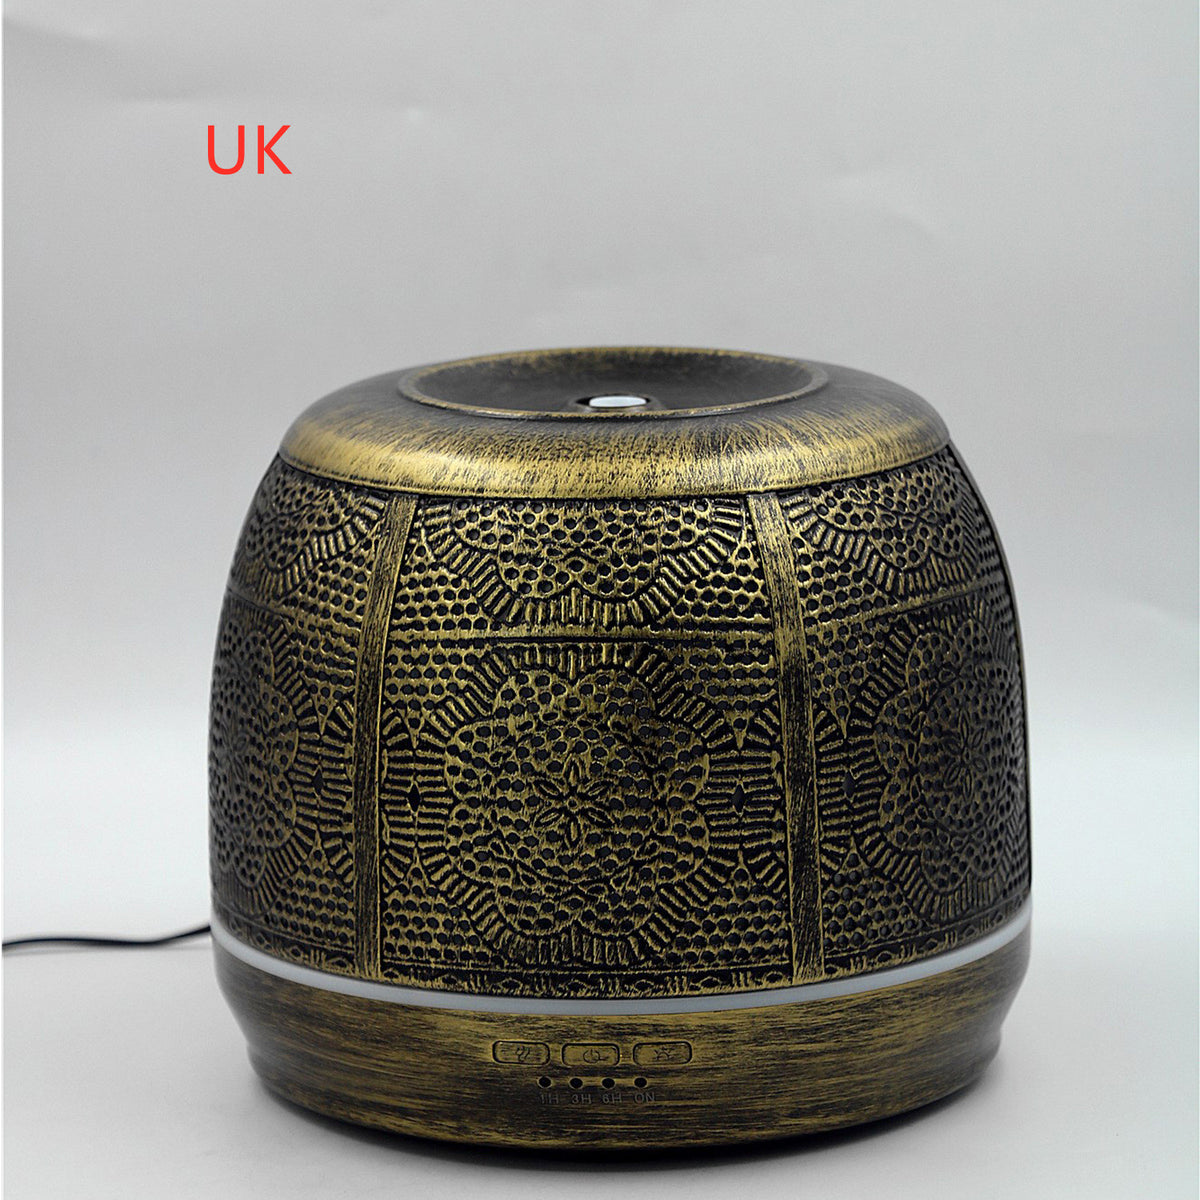 Wrought Iron Hollow Aroma Diffuser Humidifier Office Mute Aroma Diffuser Angelwarriorfitness.com